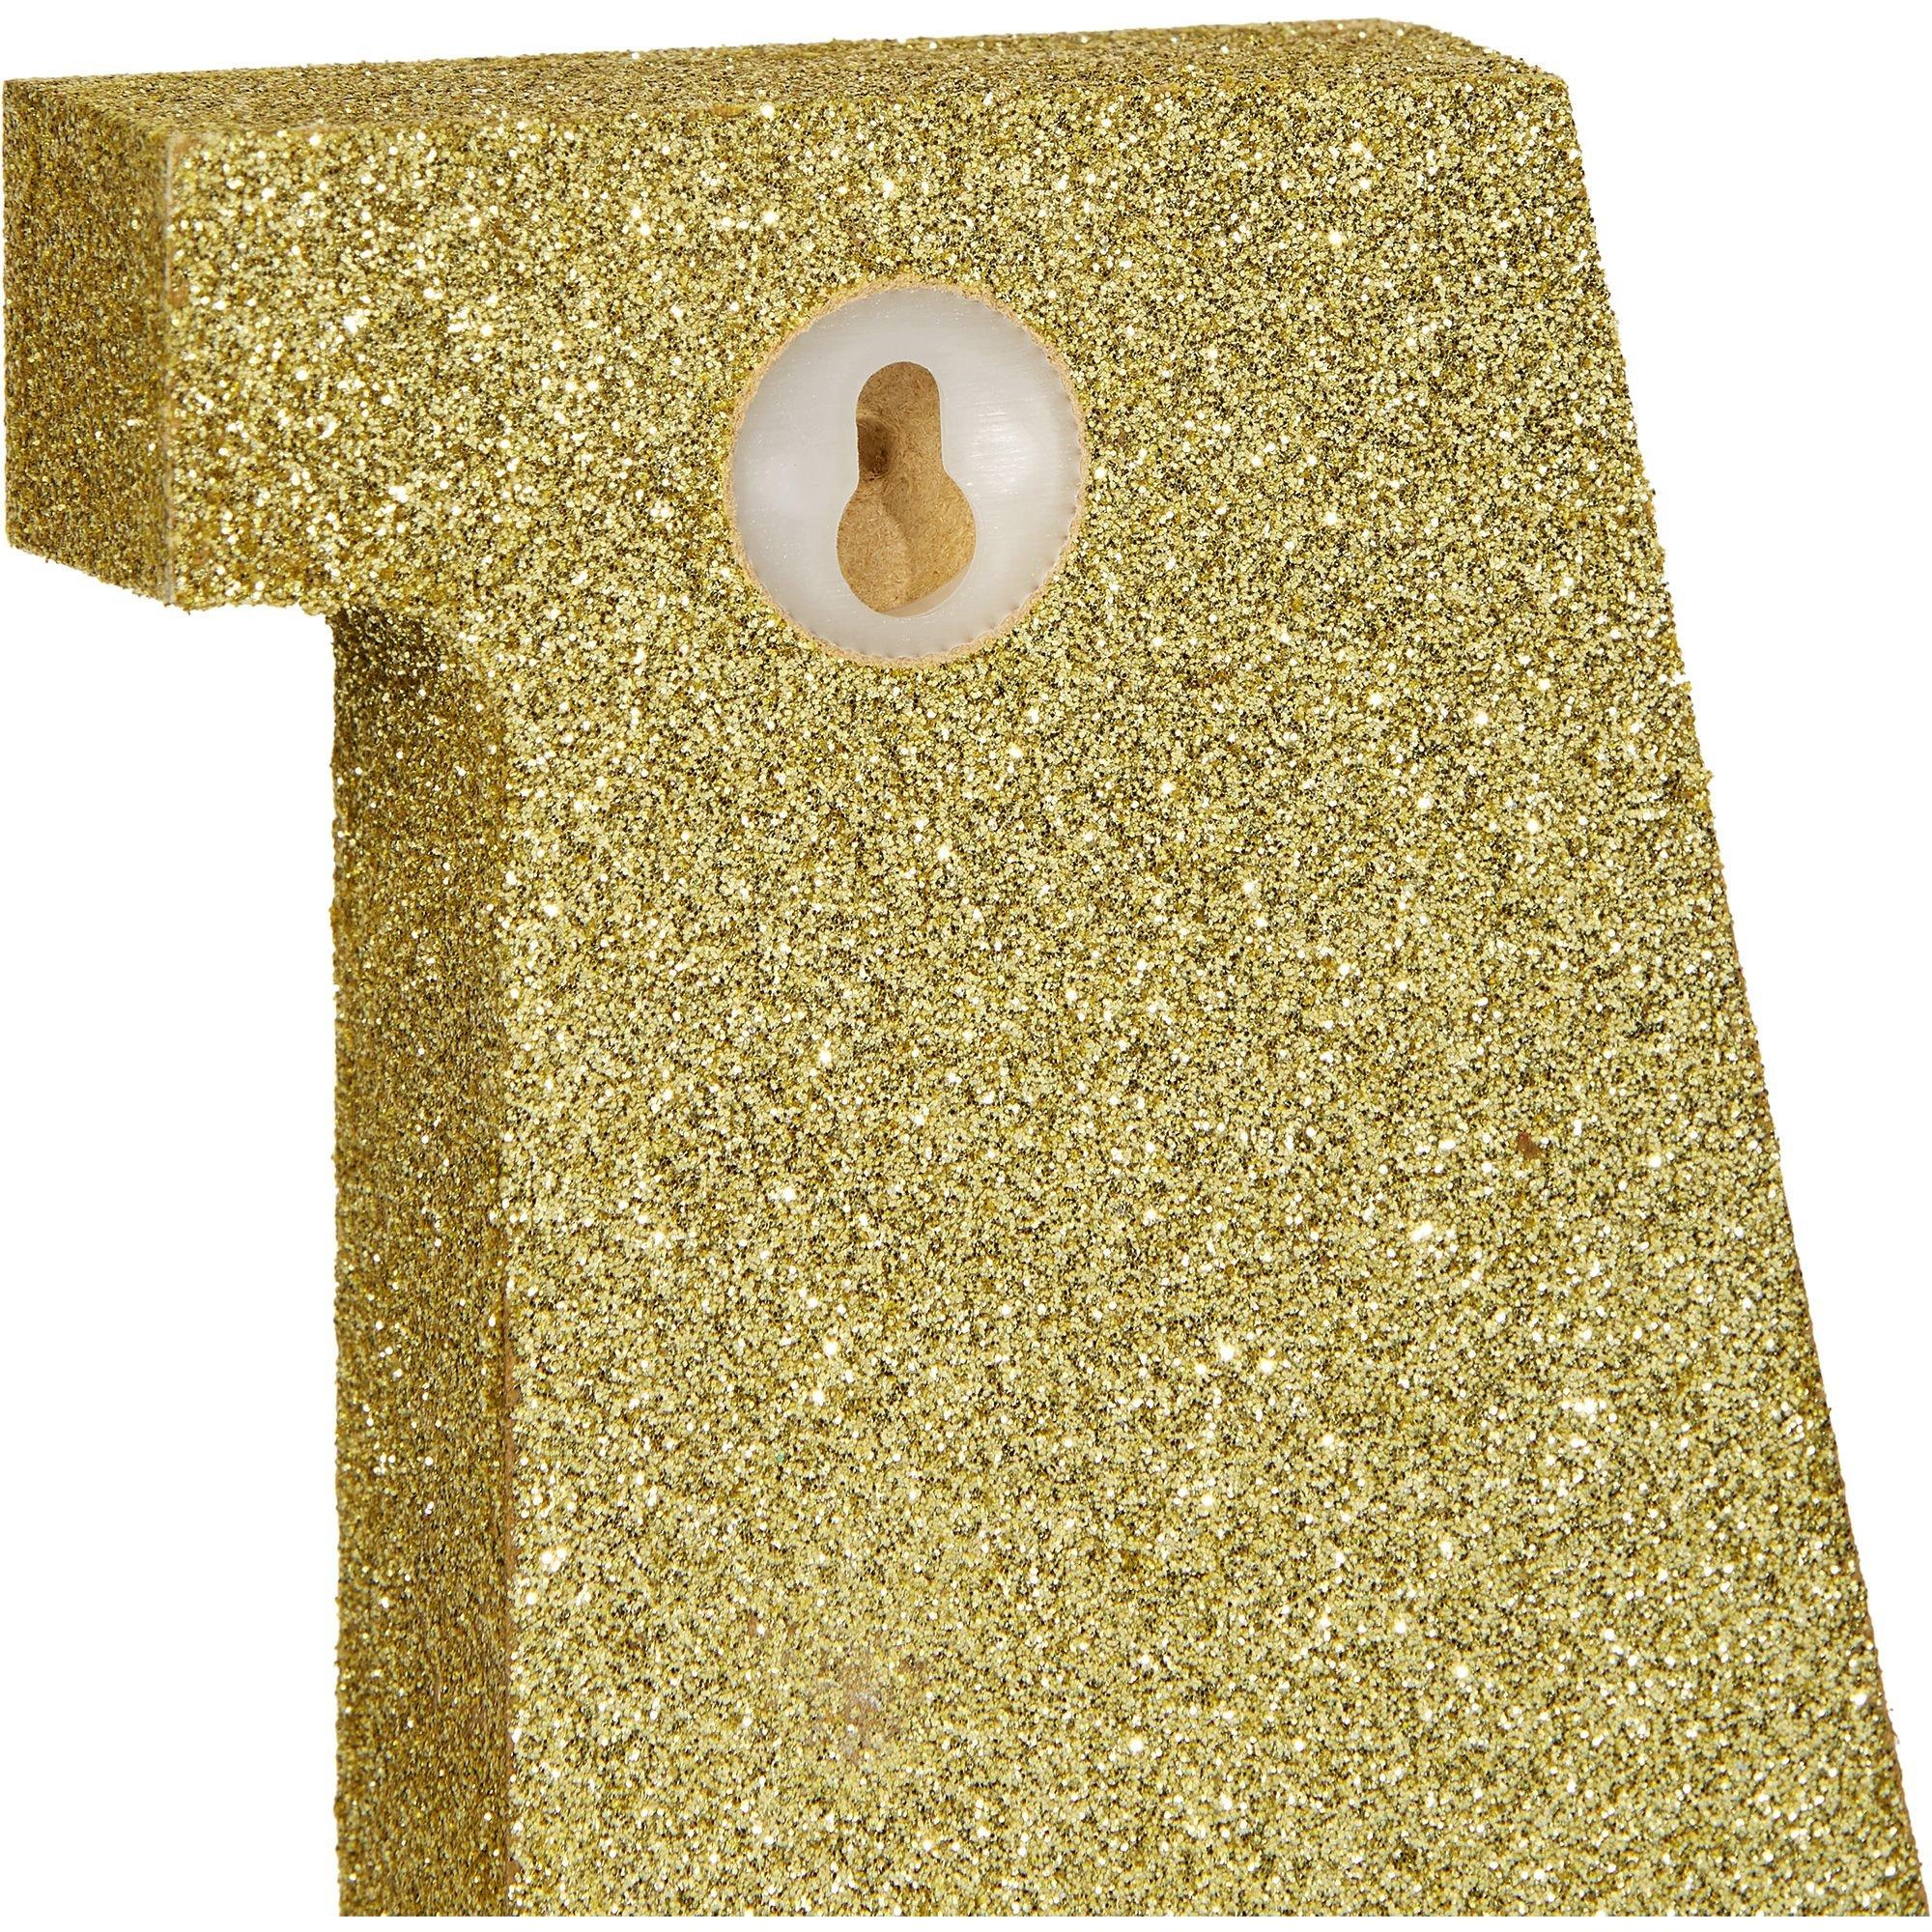 small glitter letters, small glitter letters Suppliers and Manufacturers at